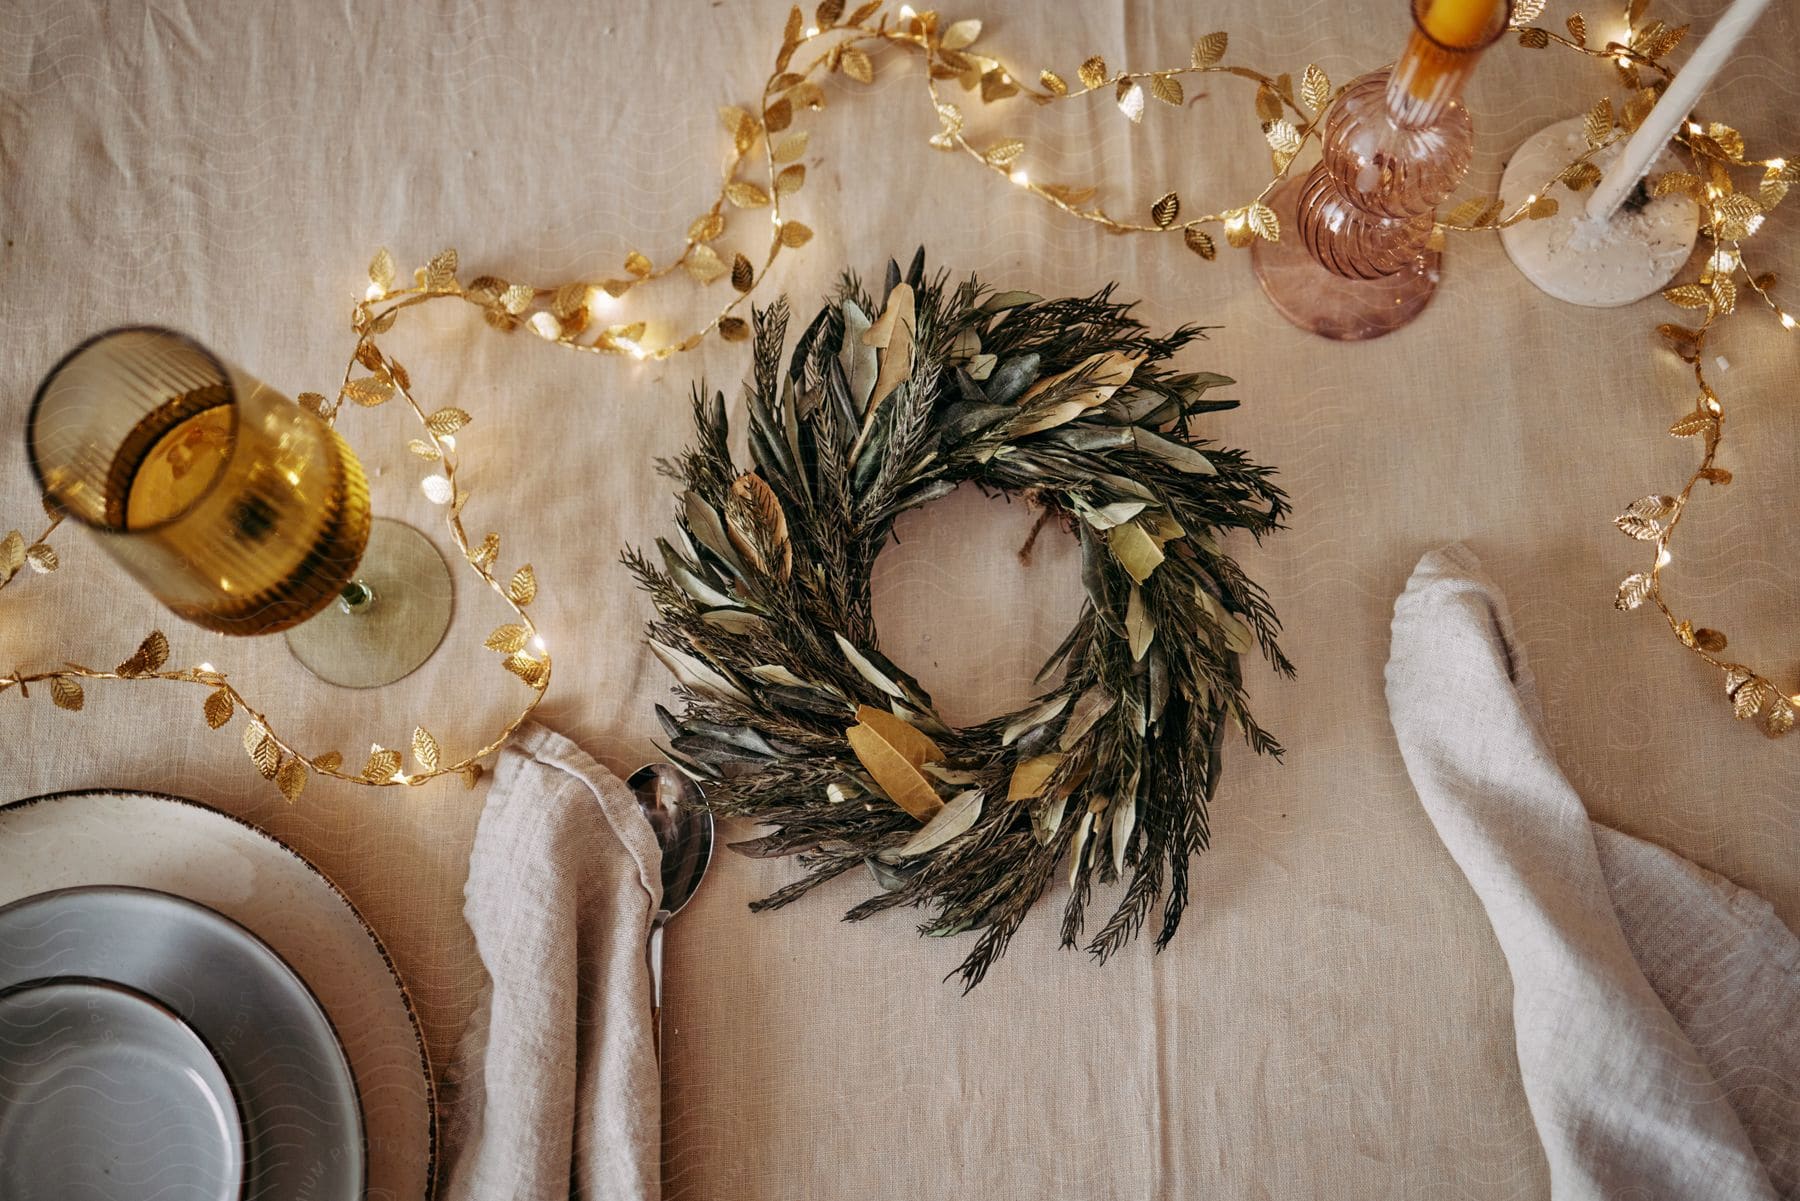 A small, green wreath sits on a dining table surrounding by tableware.